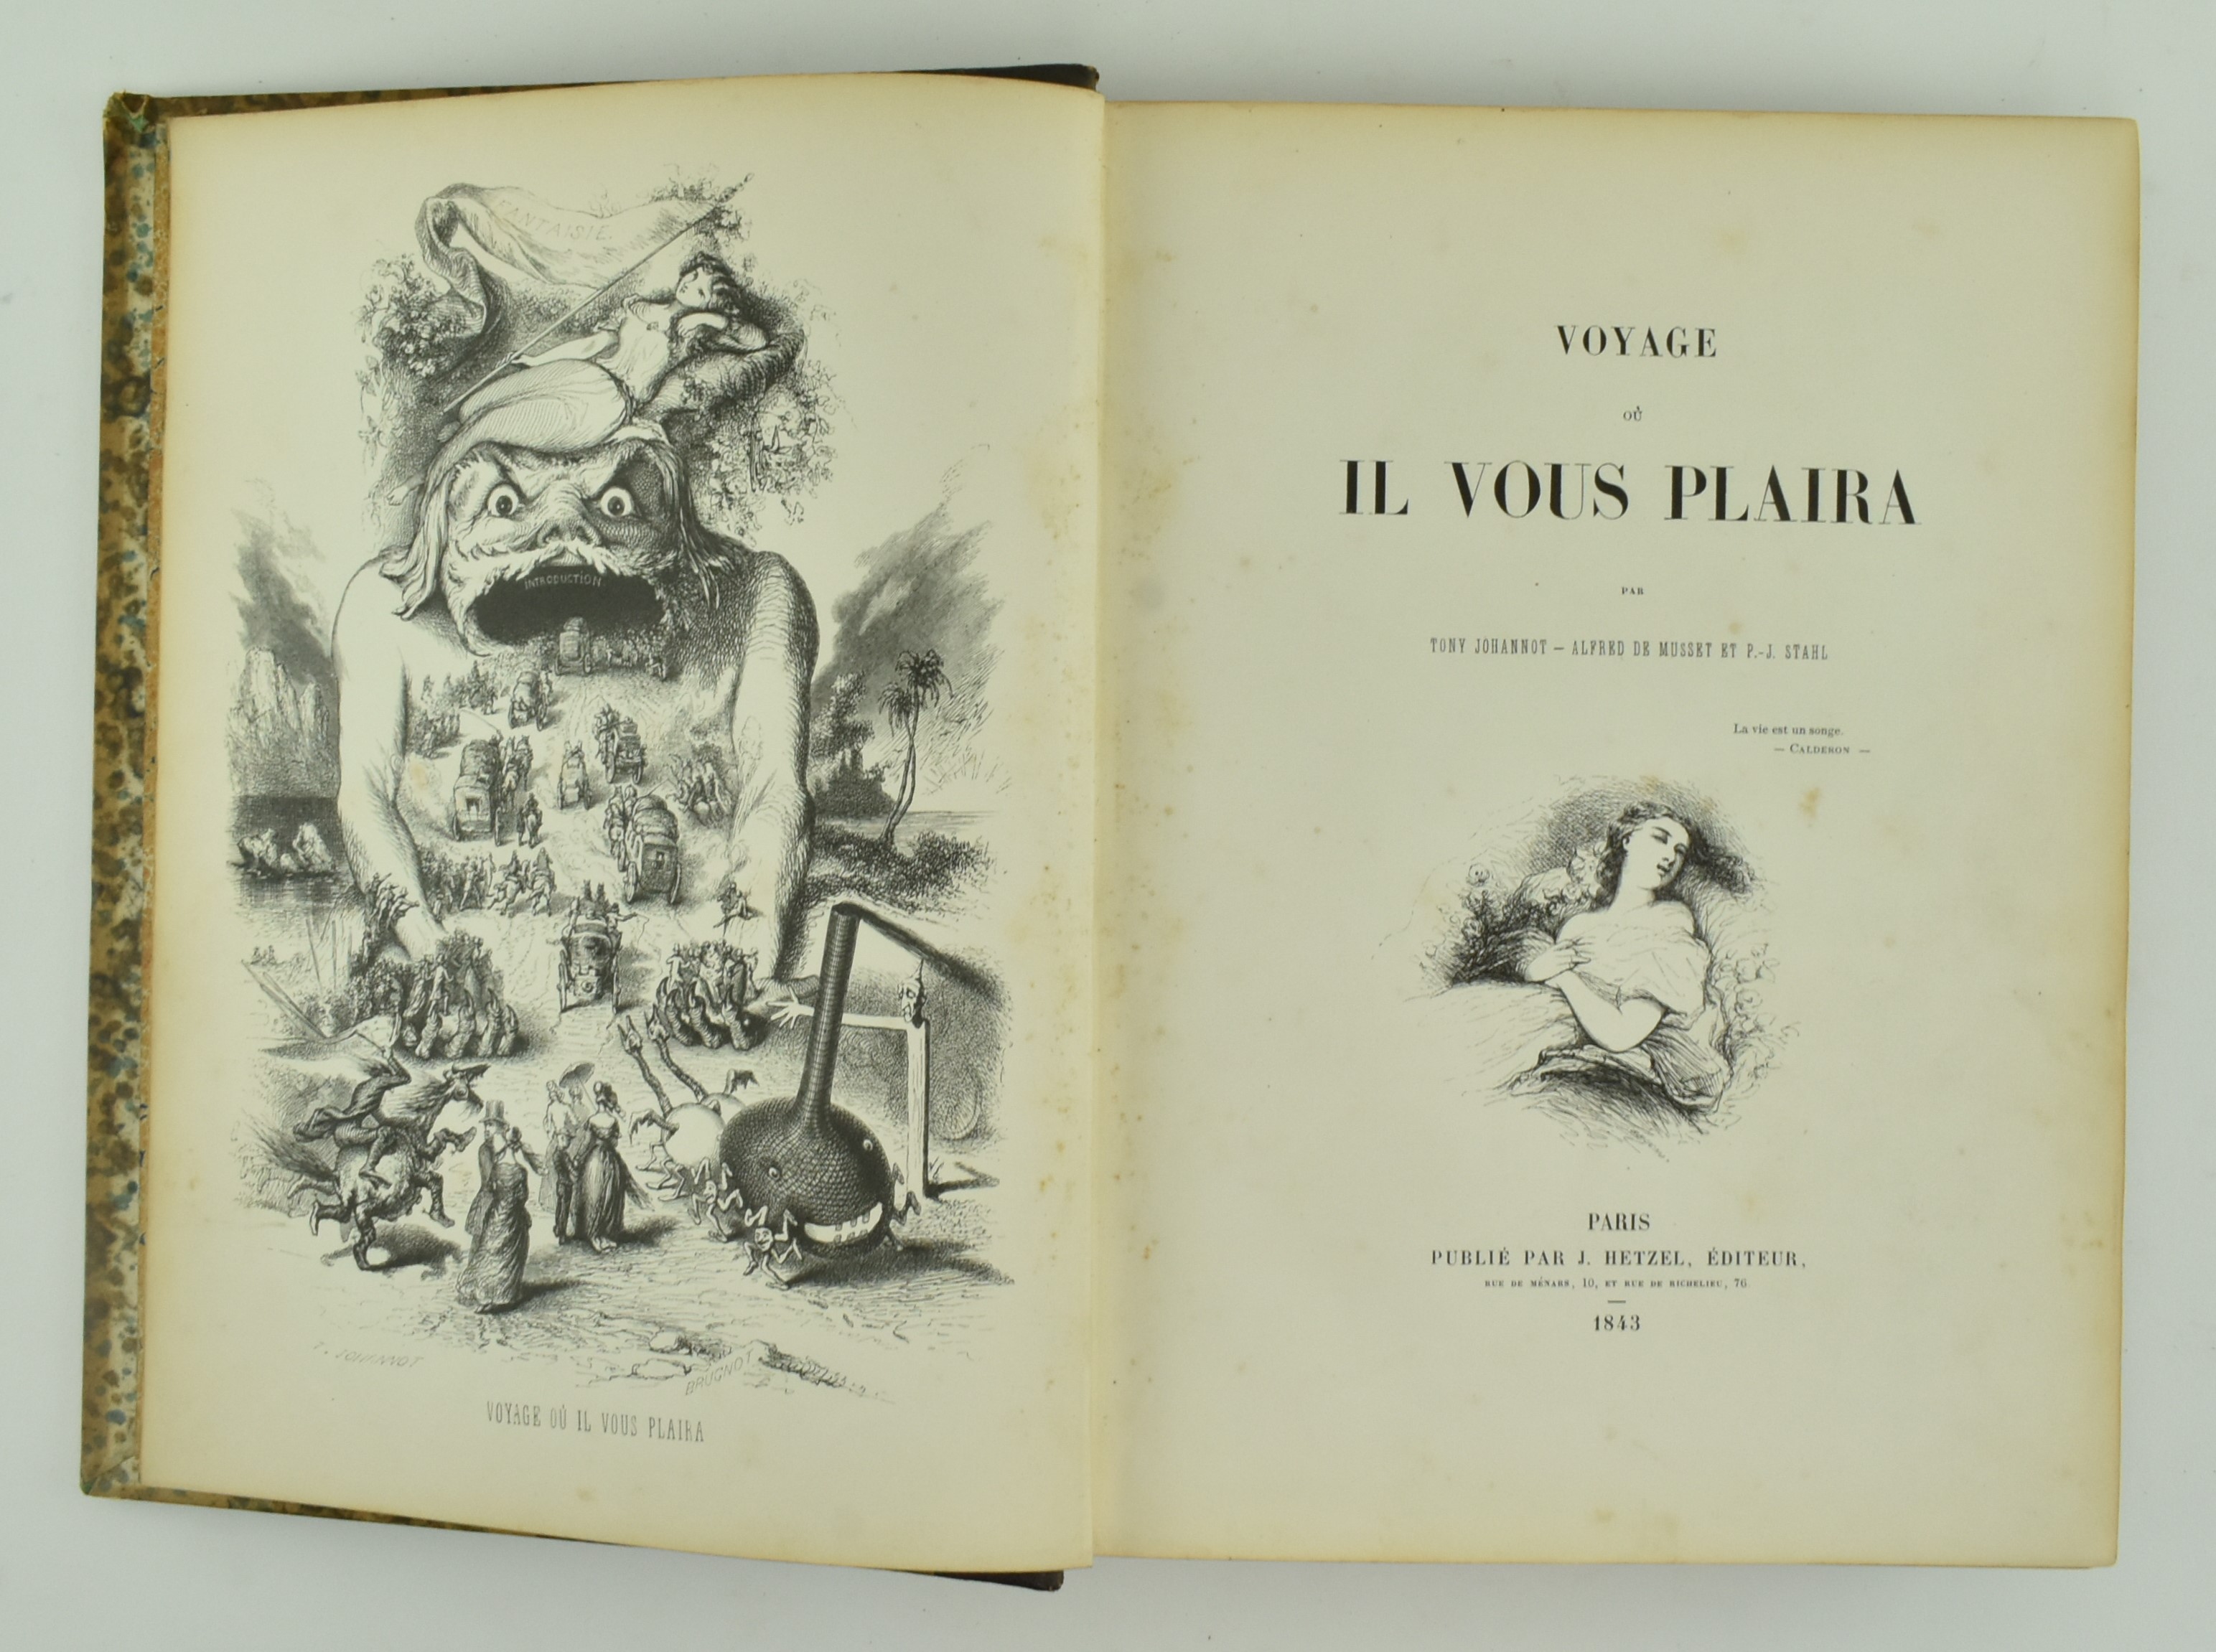 JOHANNOT, TONY. 1843 VOYAGE OU IL VOUS PLAIRA FIRST EDITION - Image 2 of 6